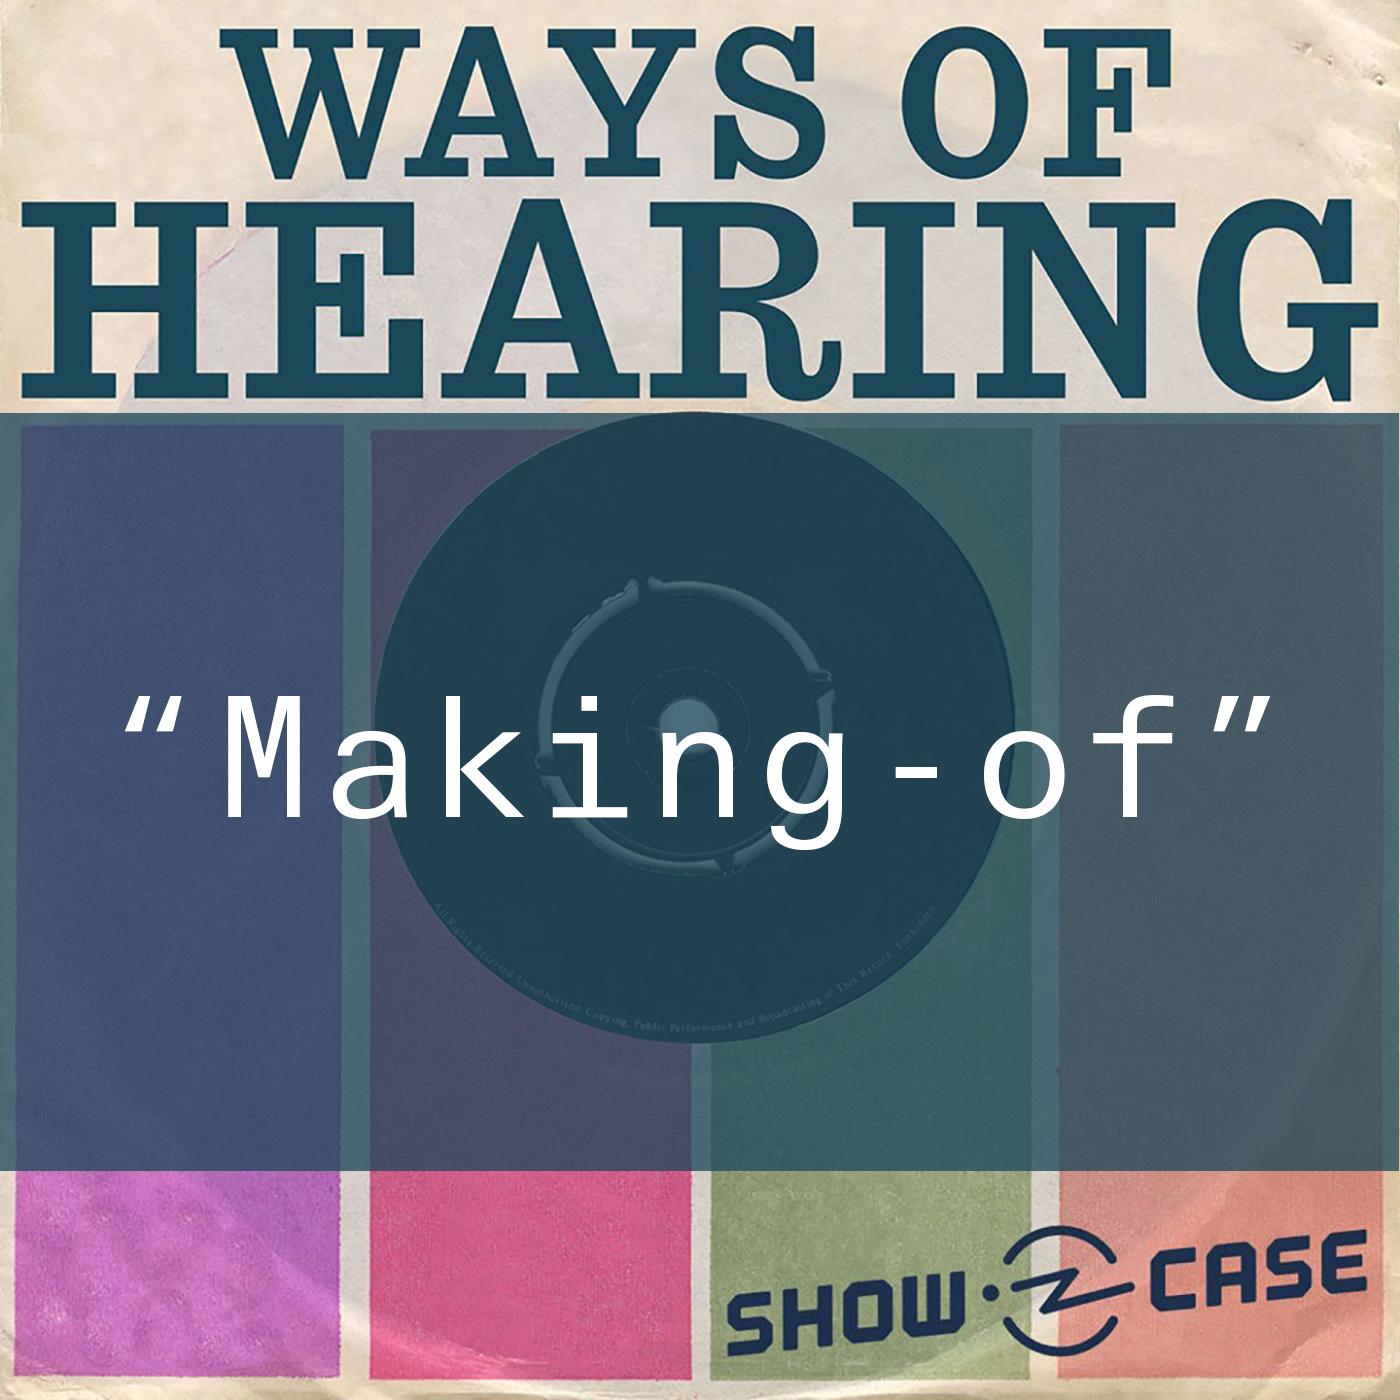 Thumbnail for "Ways of Hearing Extra – The Making-of".